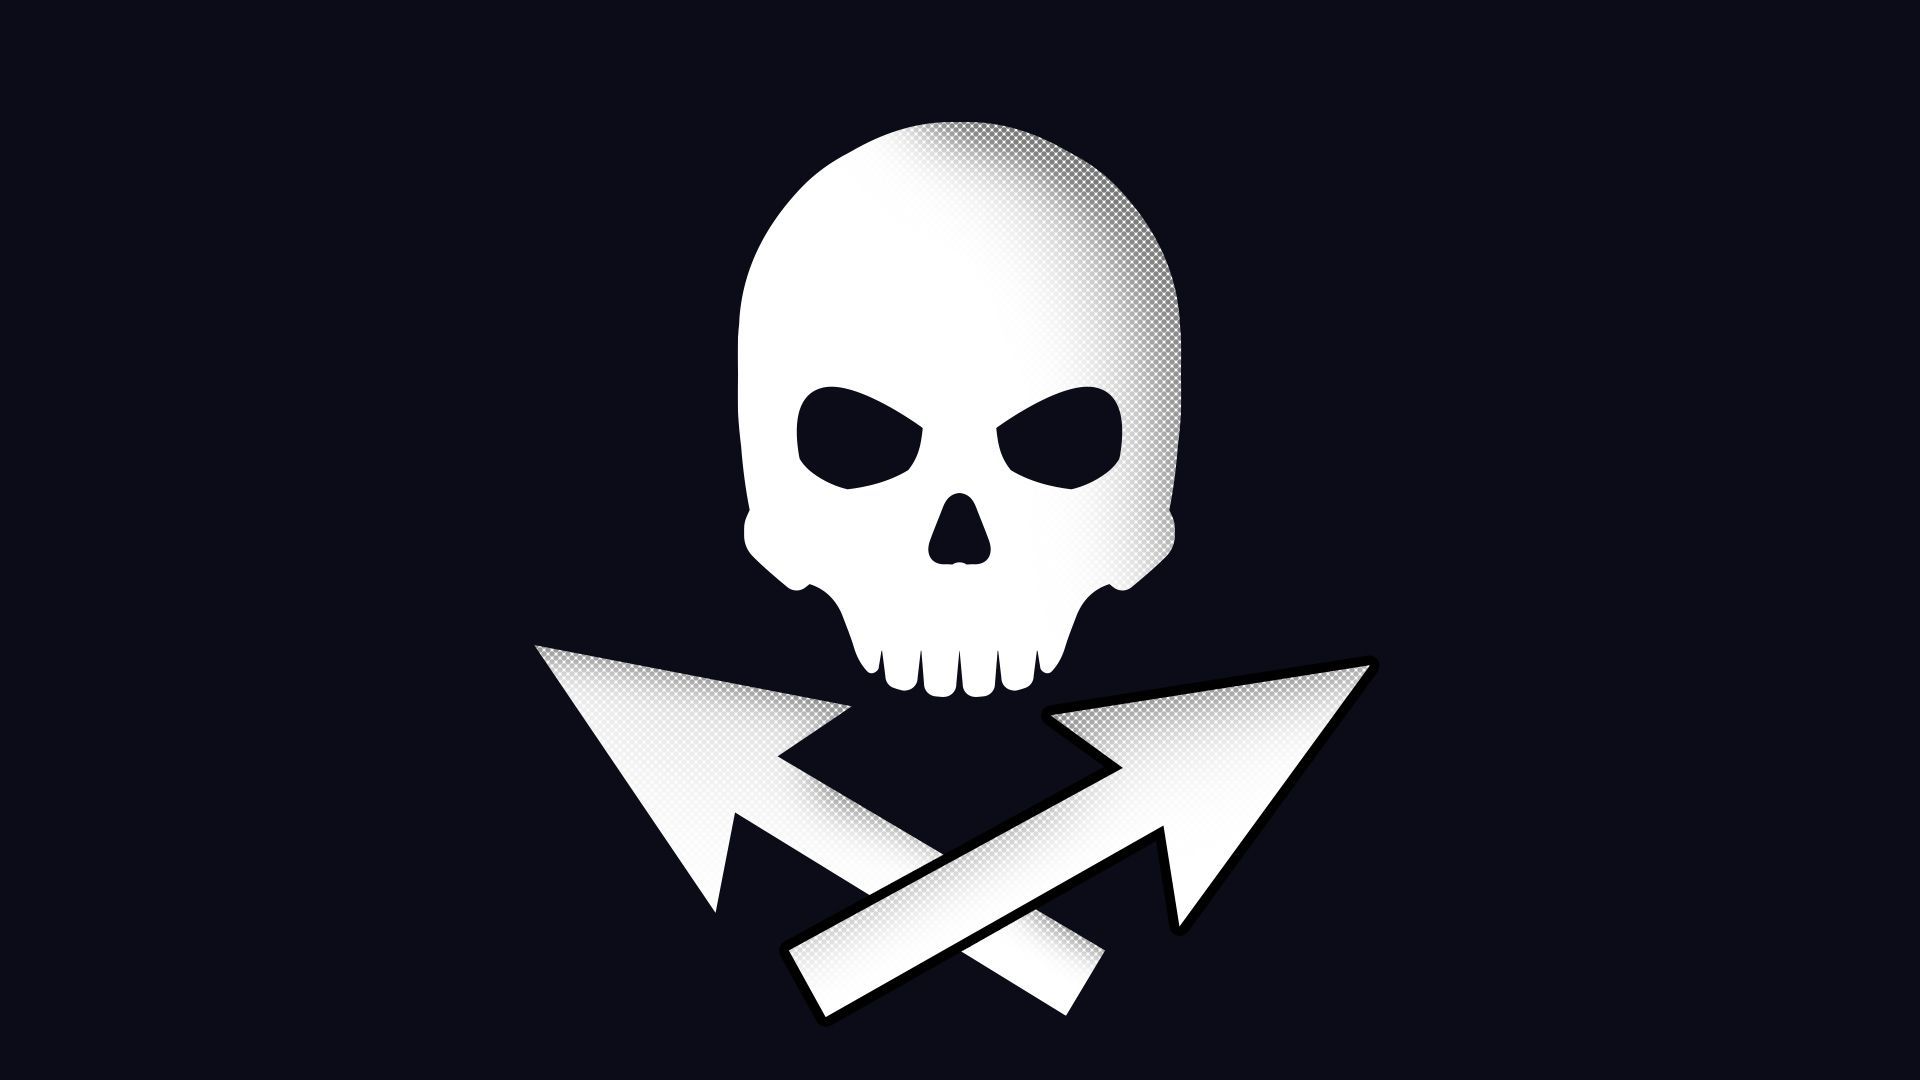 Illustration of a skull and crossbones with the crossbones as cursors. 